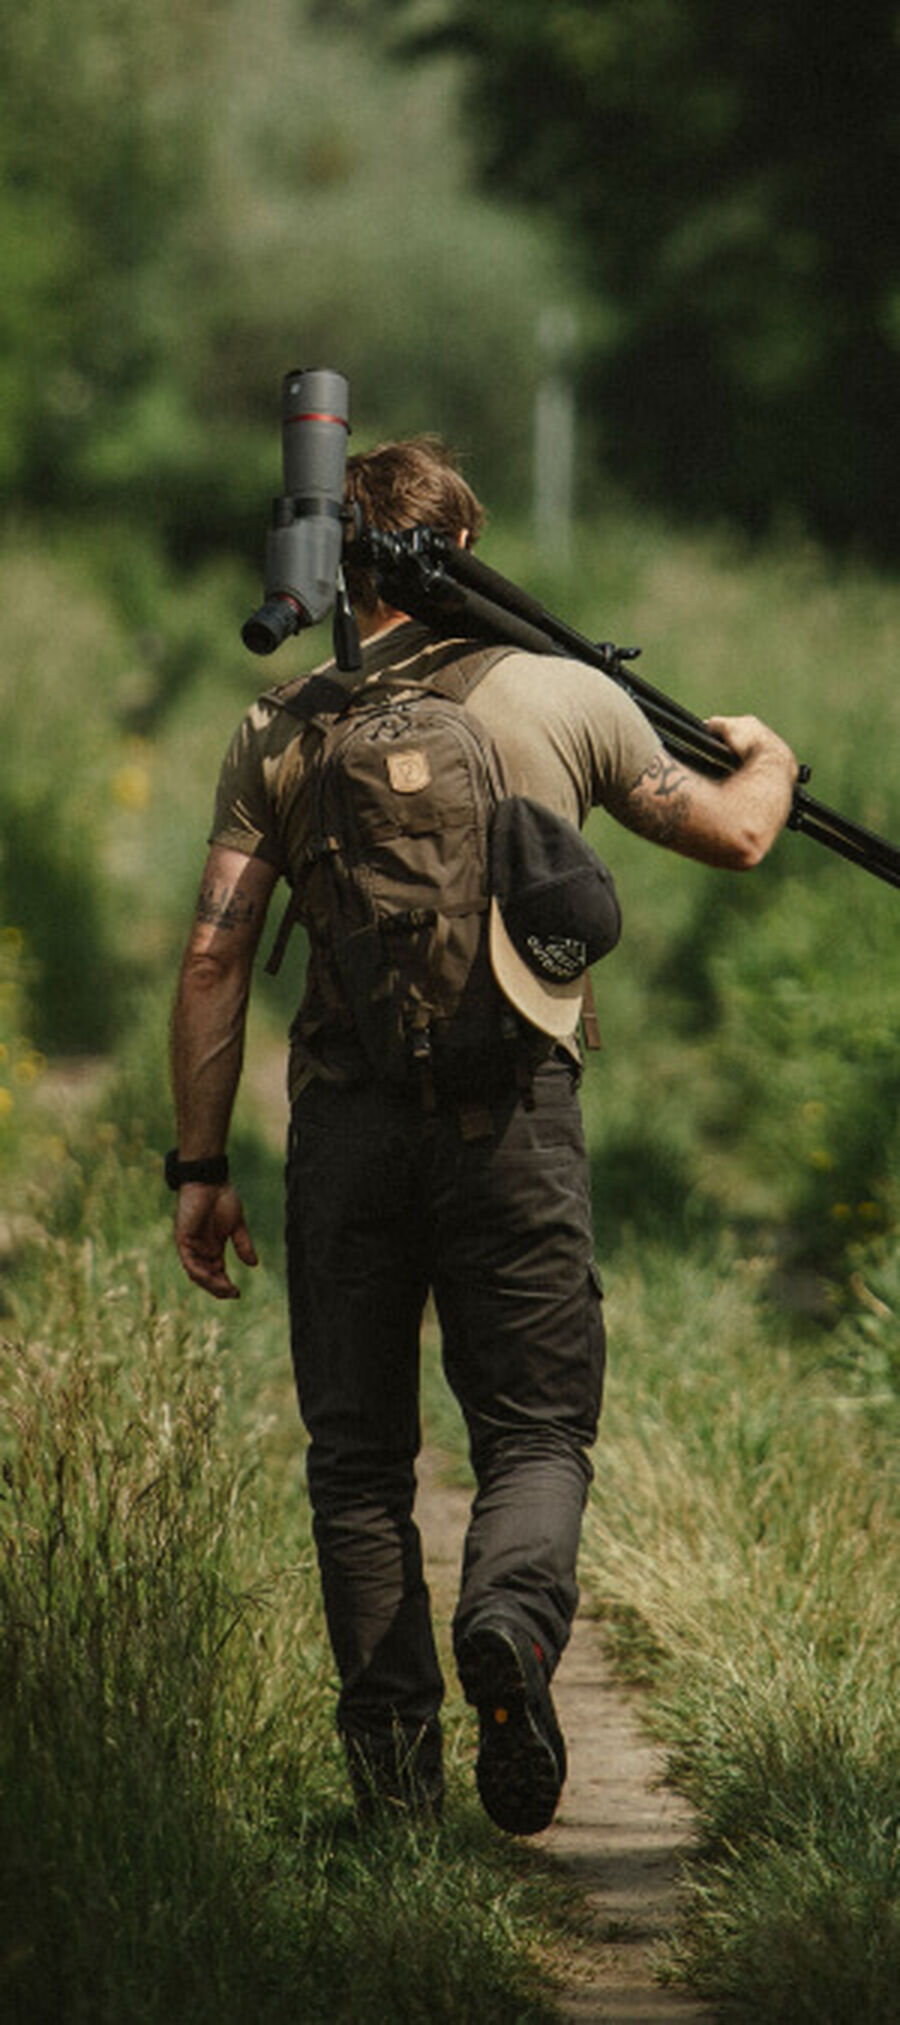 Man walking a trail carrying a Bushnell Spotting Scope